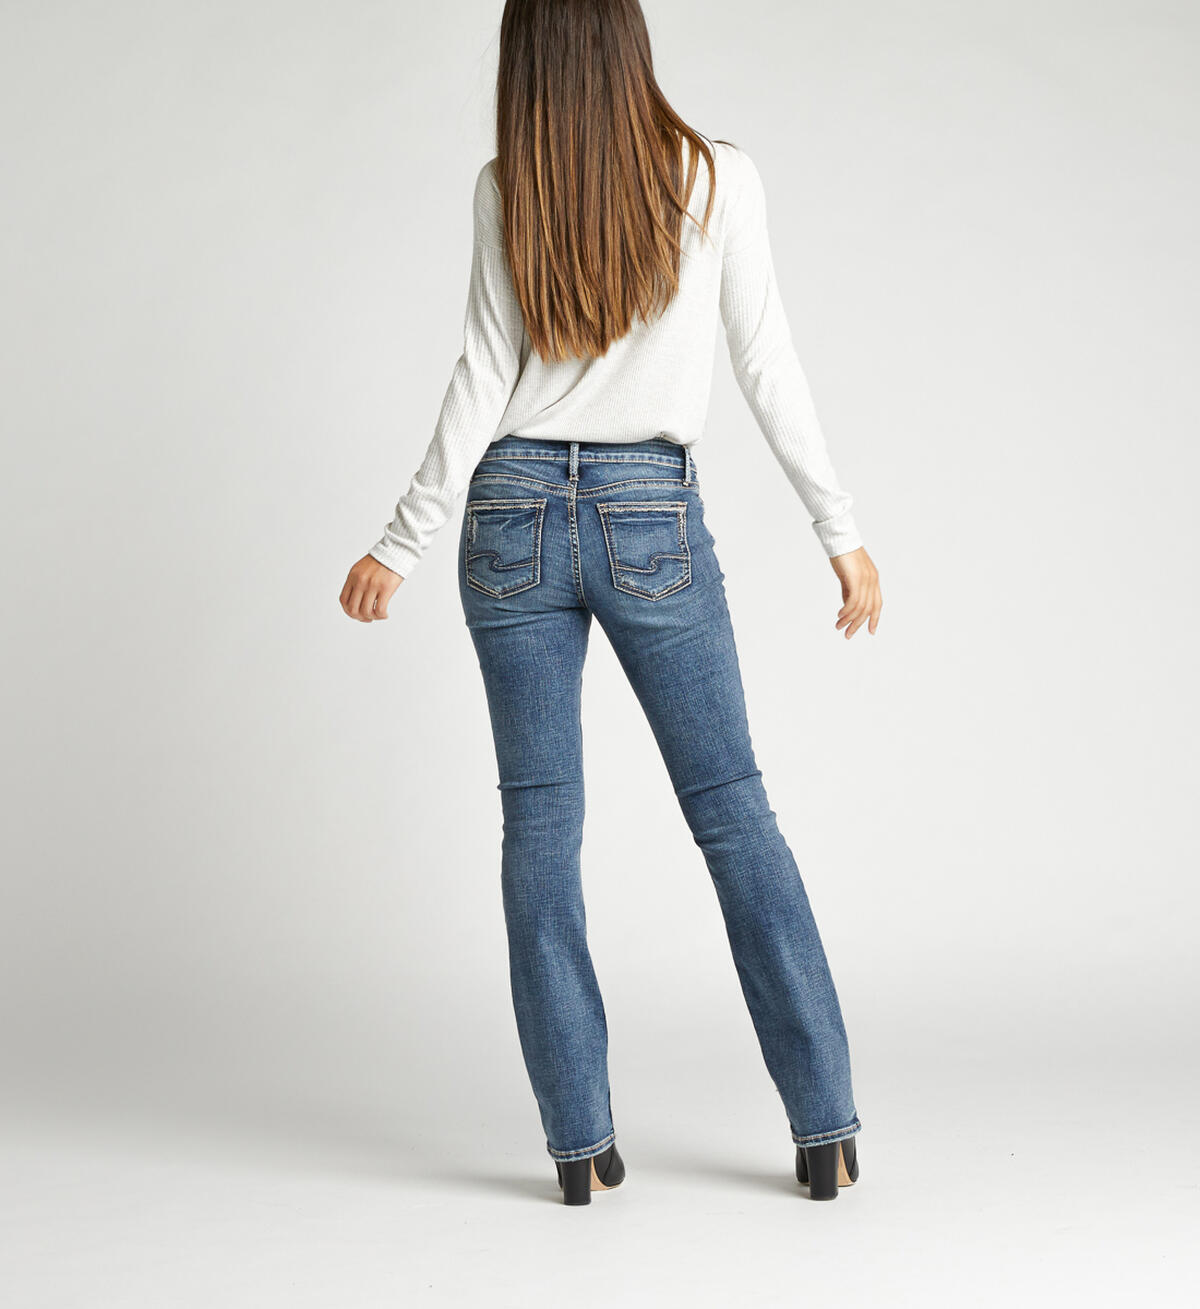 Buy Elyse Mid Rise Slim Bootcut Jeans For Usd 9400 Silver Jeans Us New